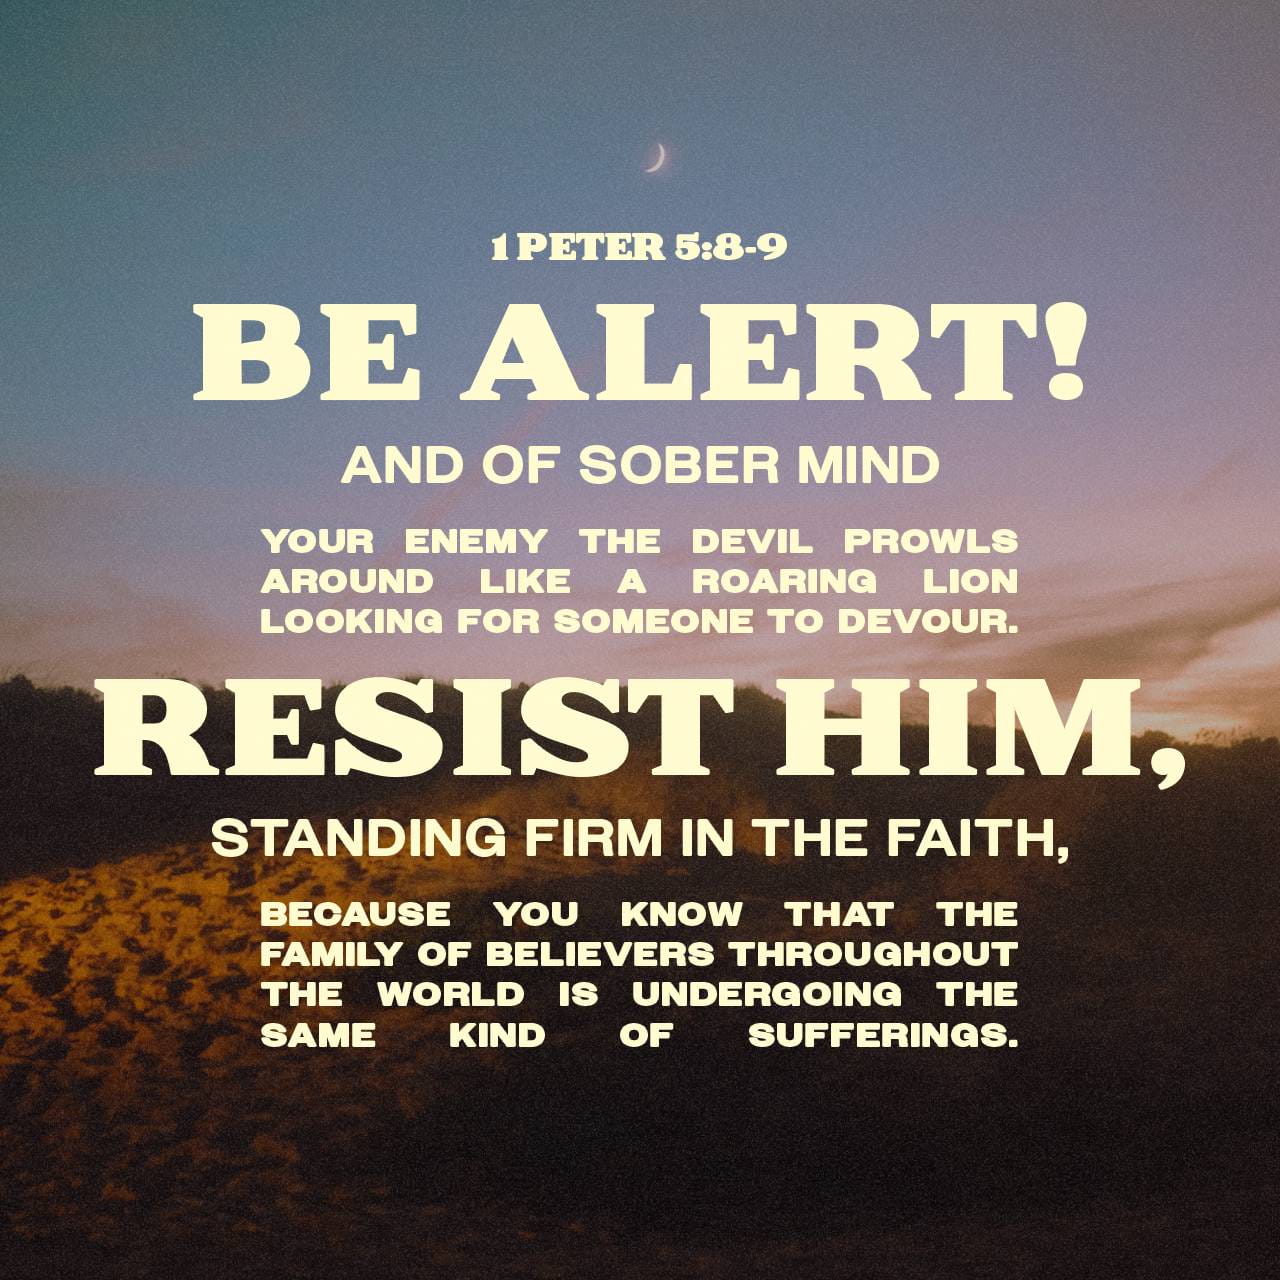 1 Peter 5:8-11 Be sober, be vigilant; because your adversary the devil, as a roaring lion, walketh about, seeking whom he may devour: whom resist stedfast in the faith, knowing that the same afflictions are accompli | King James Version (KJV) | Download T